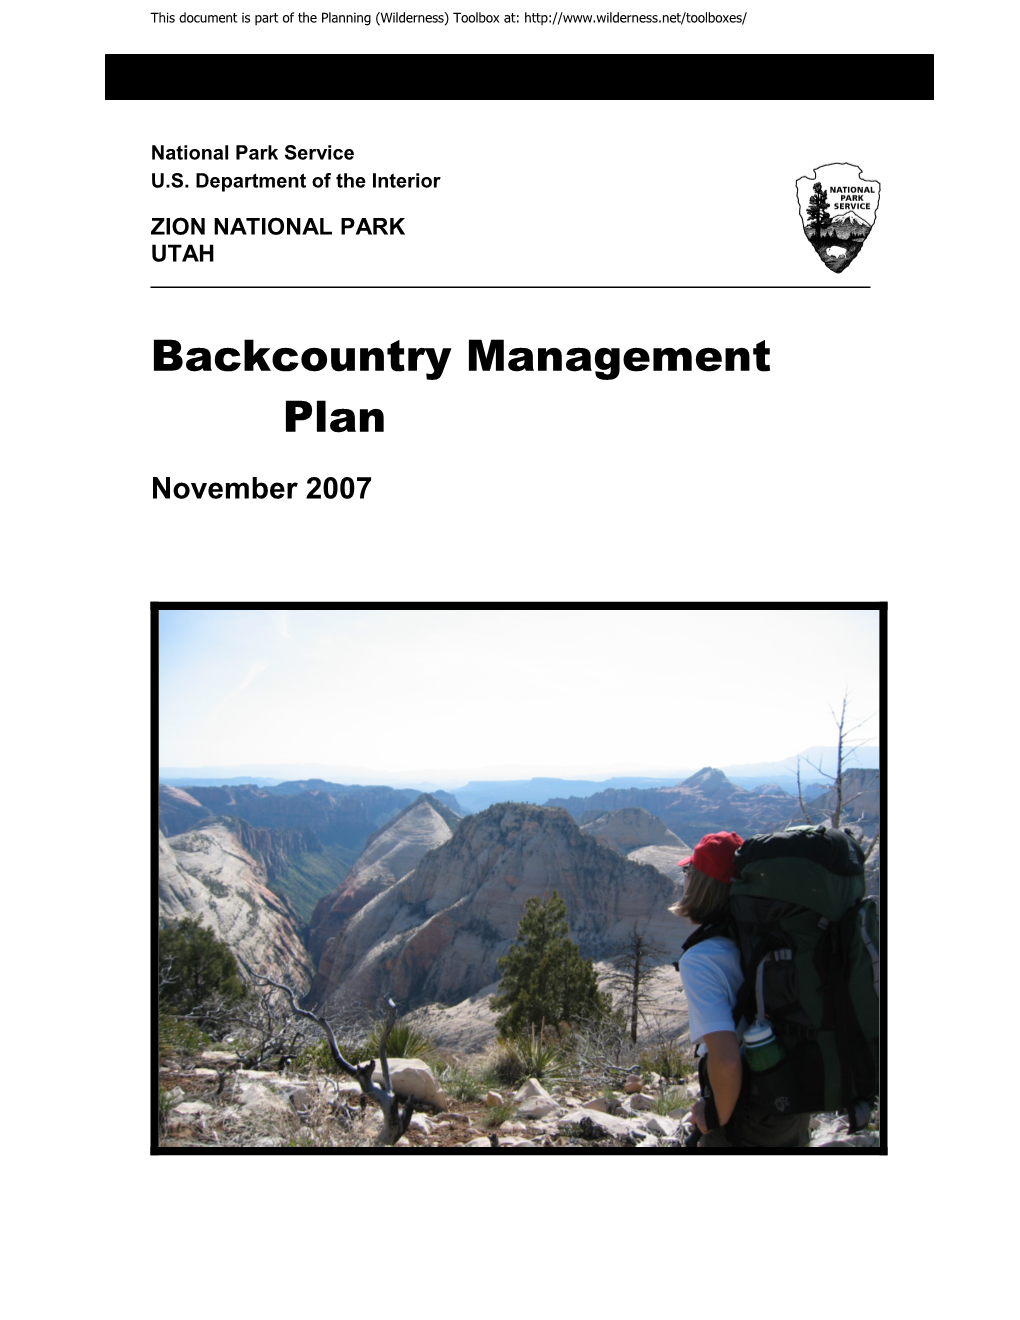 Zion National Park Backcountry Management Plan